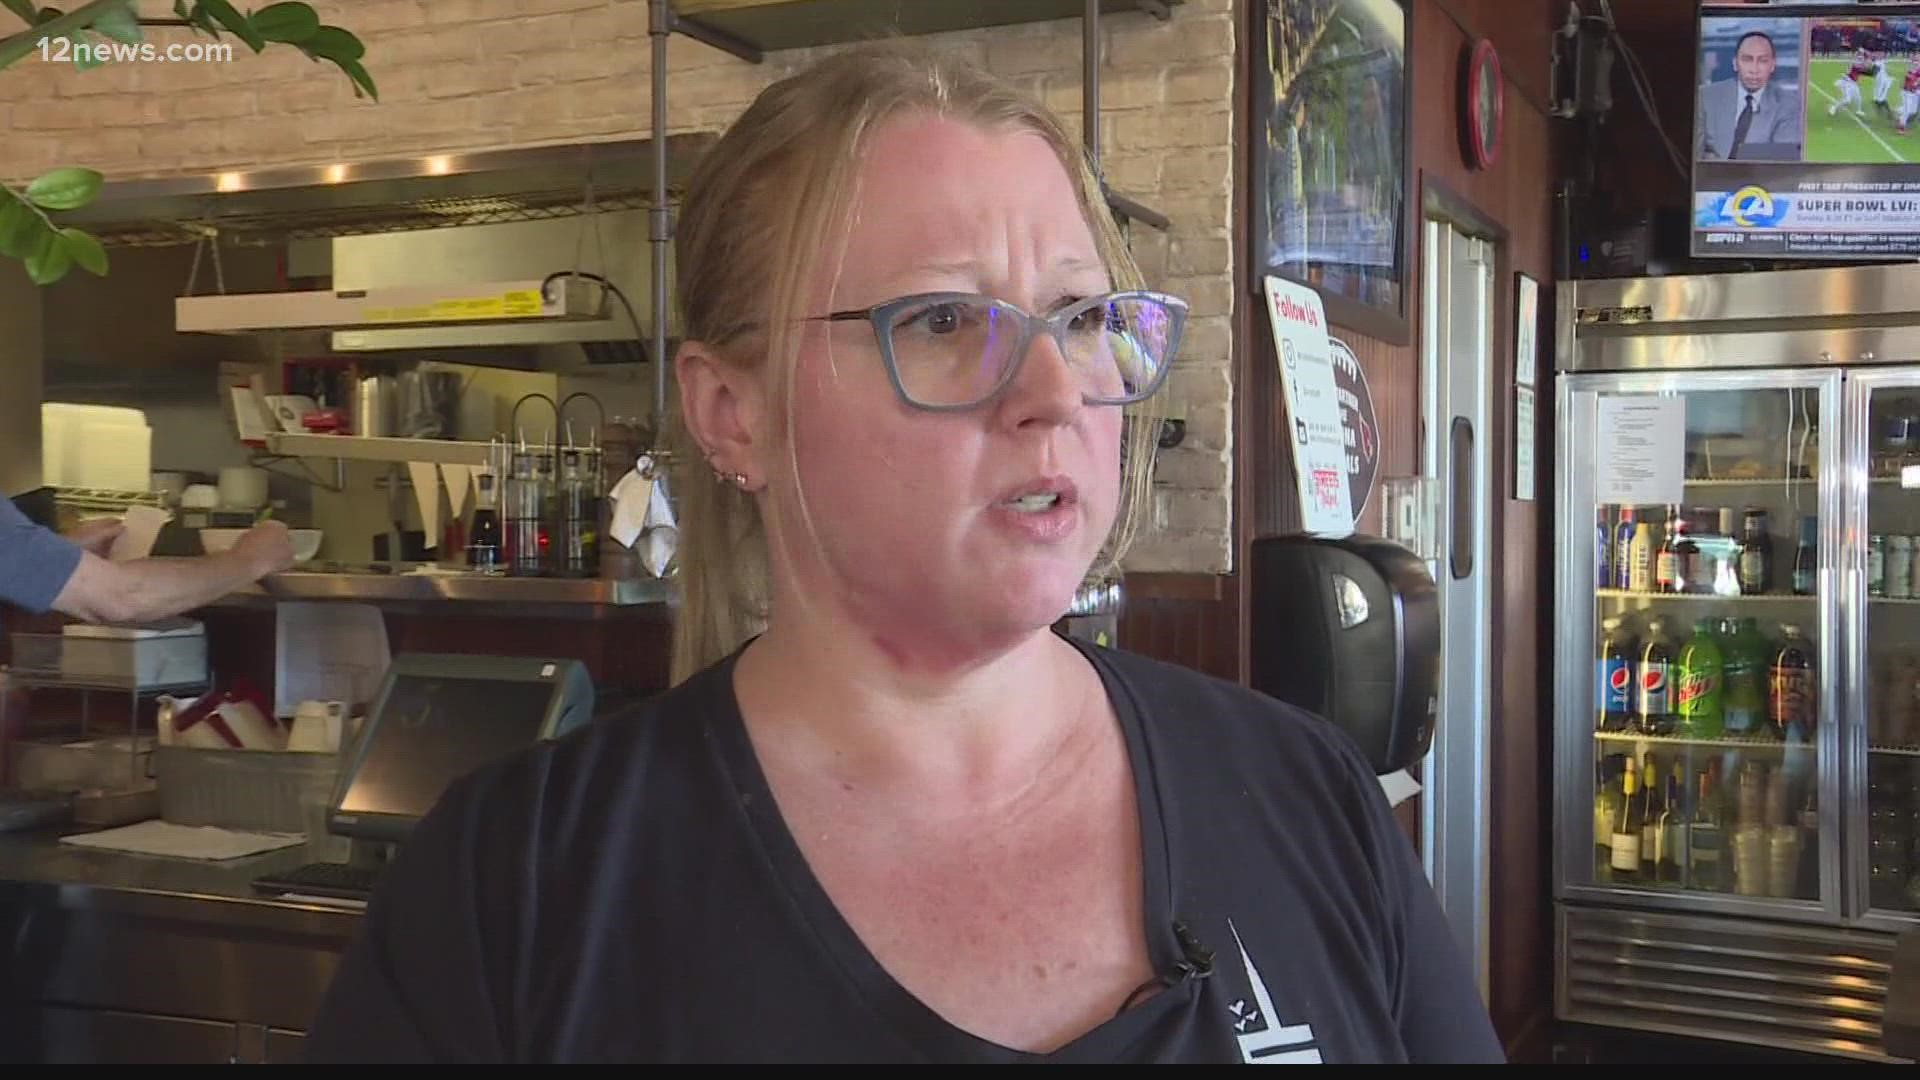 Samantha Klasinski, a single mom of two, has worked at the Streets of New York as a server for 12 years and is being recognized for her hard work and commitment.